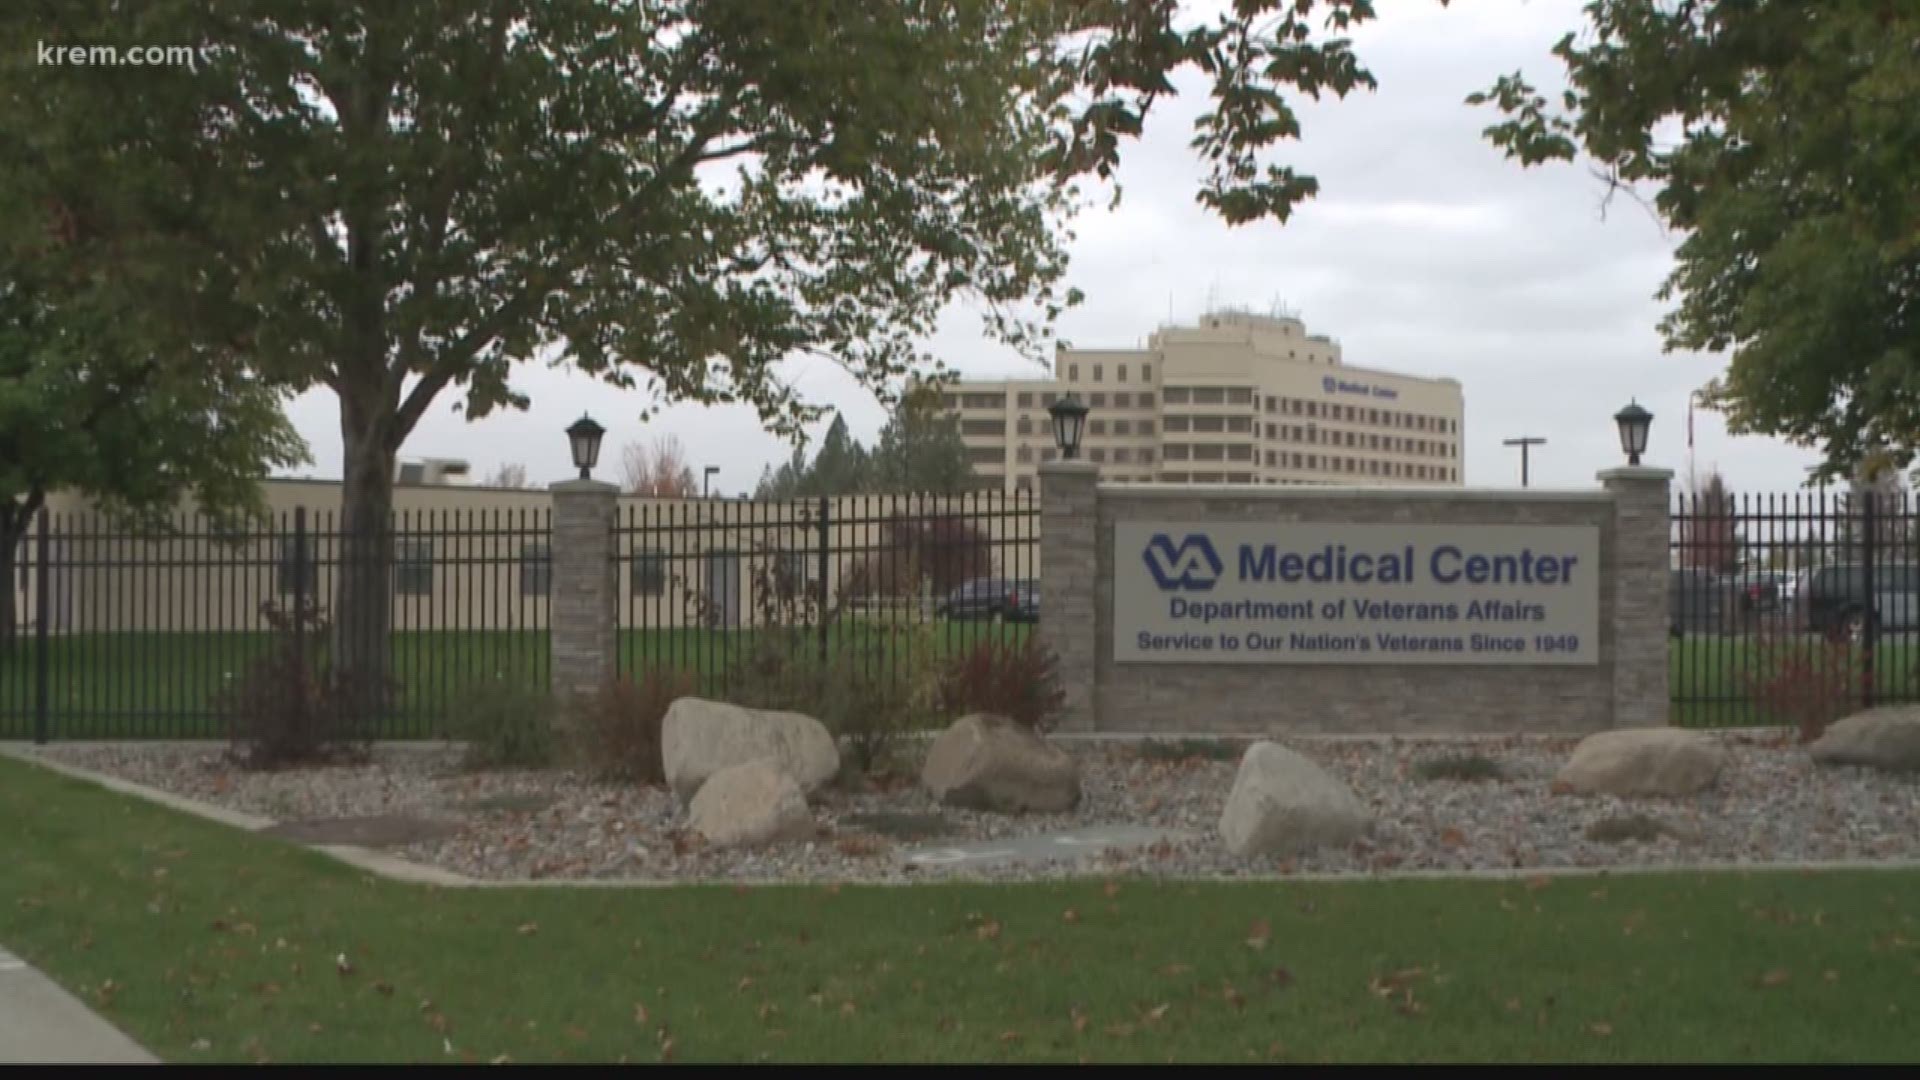 The VA Hospital in Spokane is having problems with their boiler, which they say is causing their sterilization equipment not to work. Now, veterans are having to reschedule dental appointments, and surgeries.